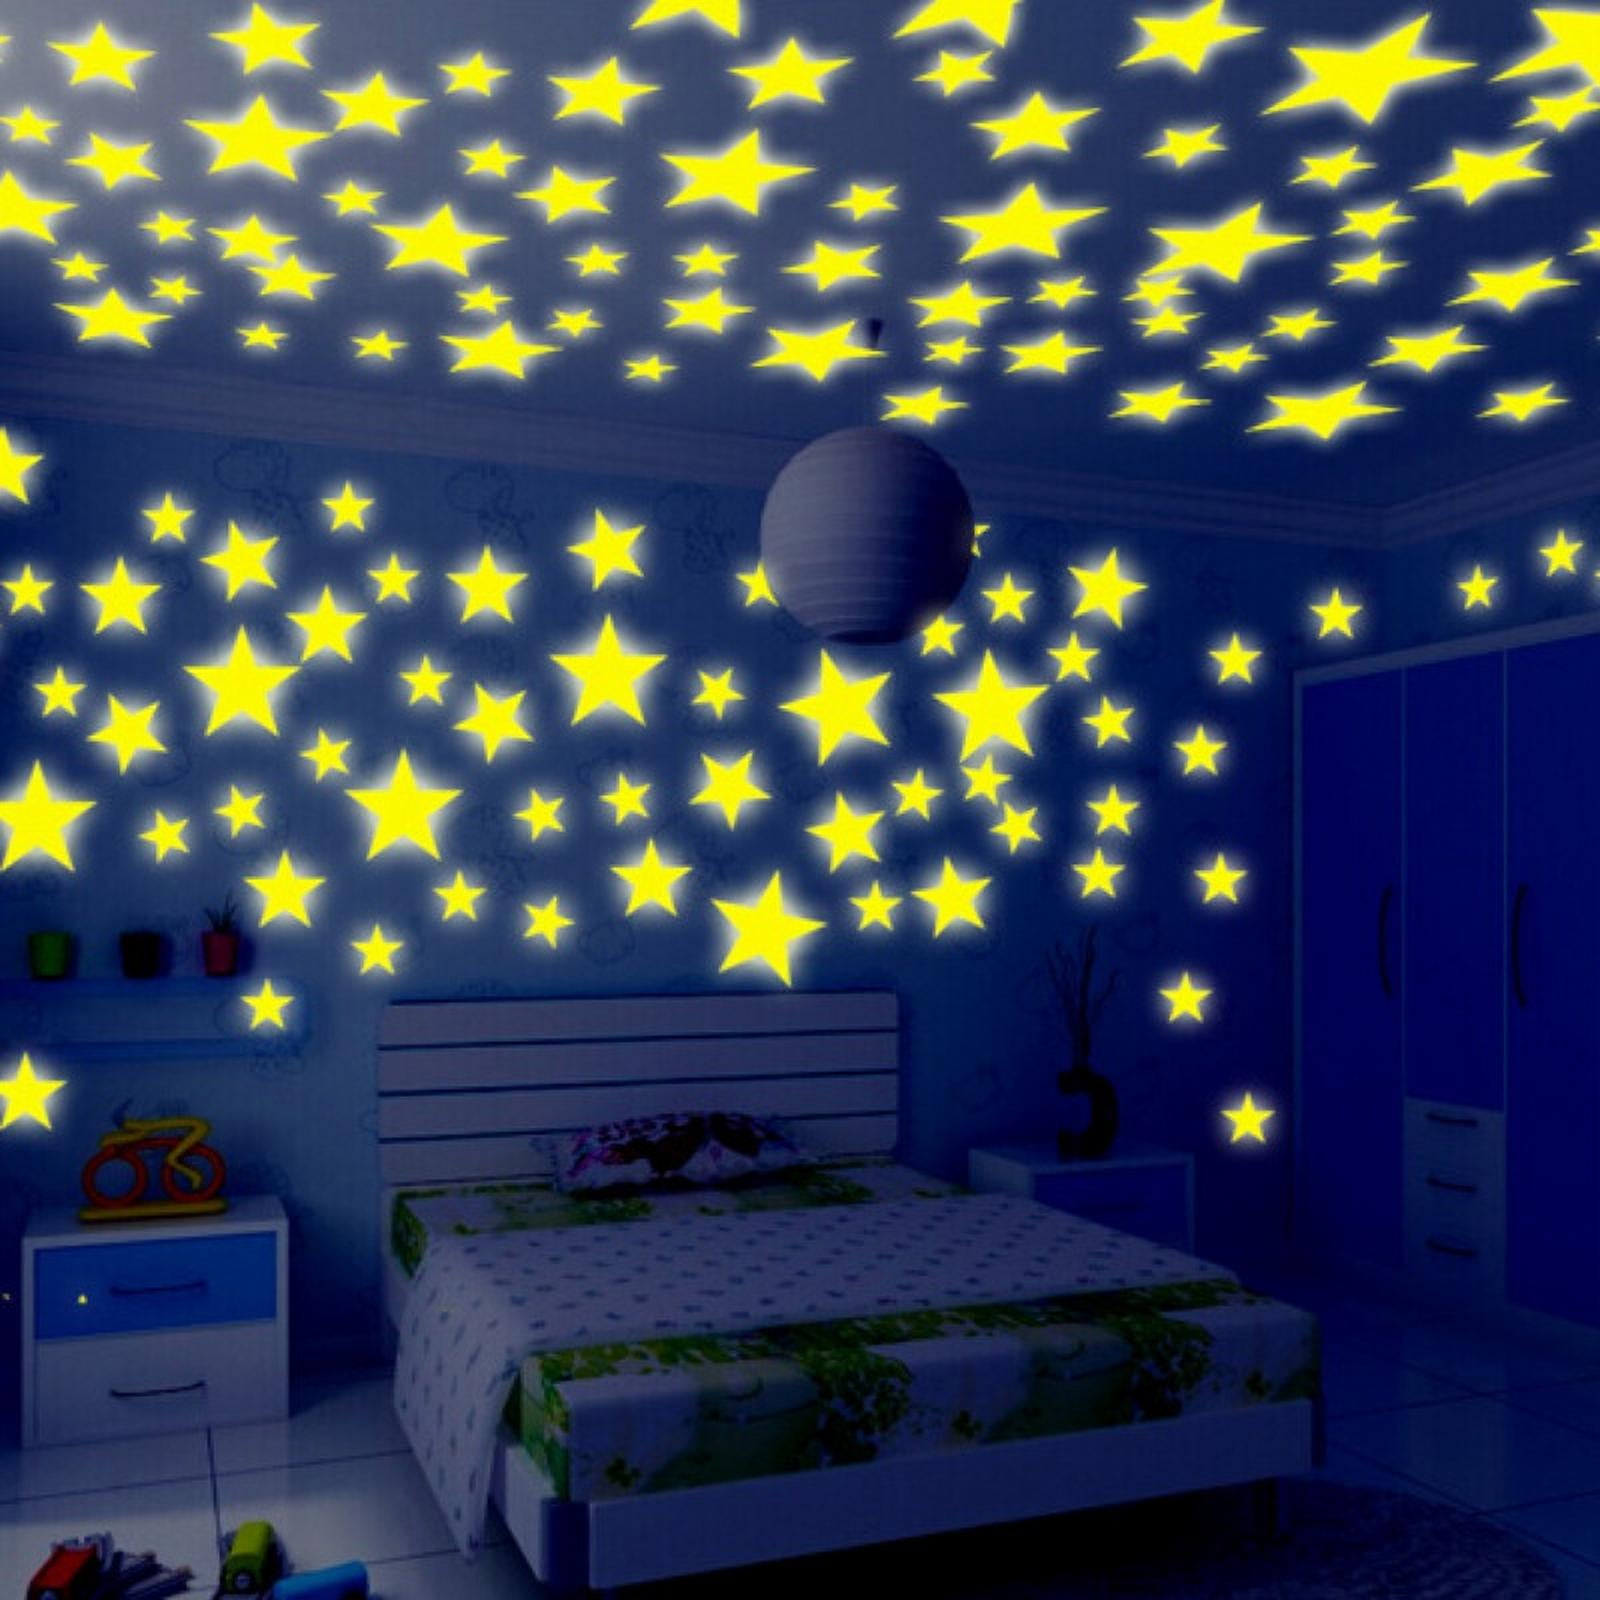 Glow in The Dark Stars-Stars Decor Sticker for Ceiling-Adhesive 100pcs 3D Glowing Stars for Wall Decoration for Kids Baby Bedroom Rooms,Starry Sky（Pink）